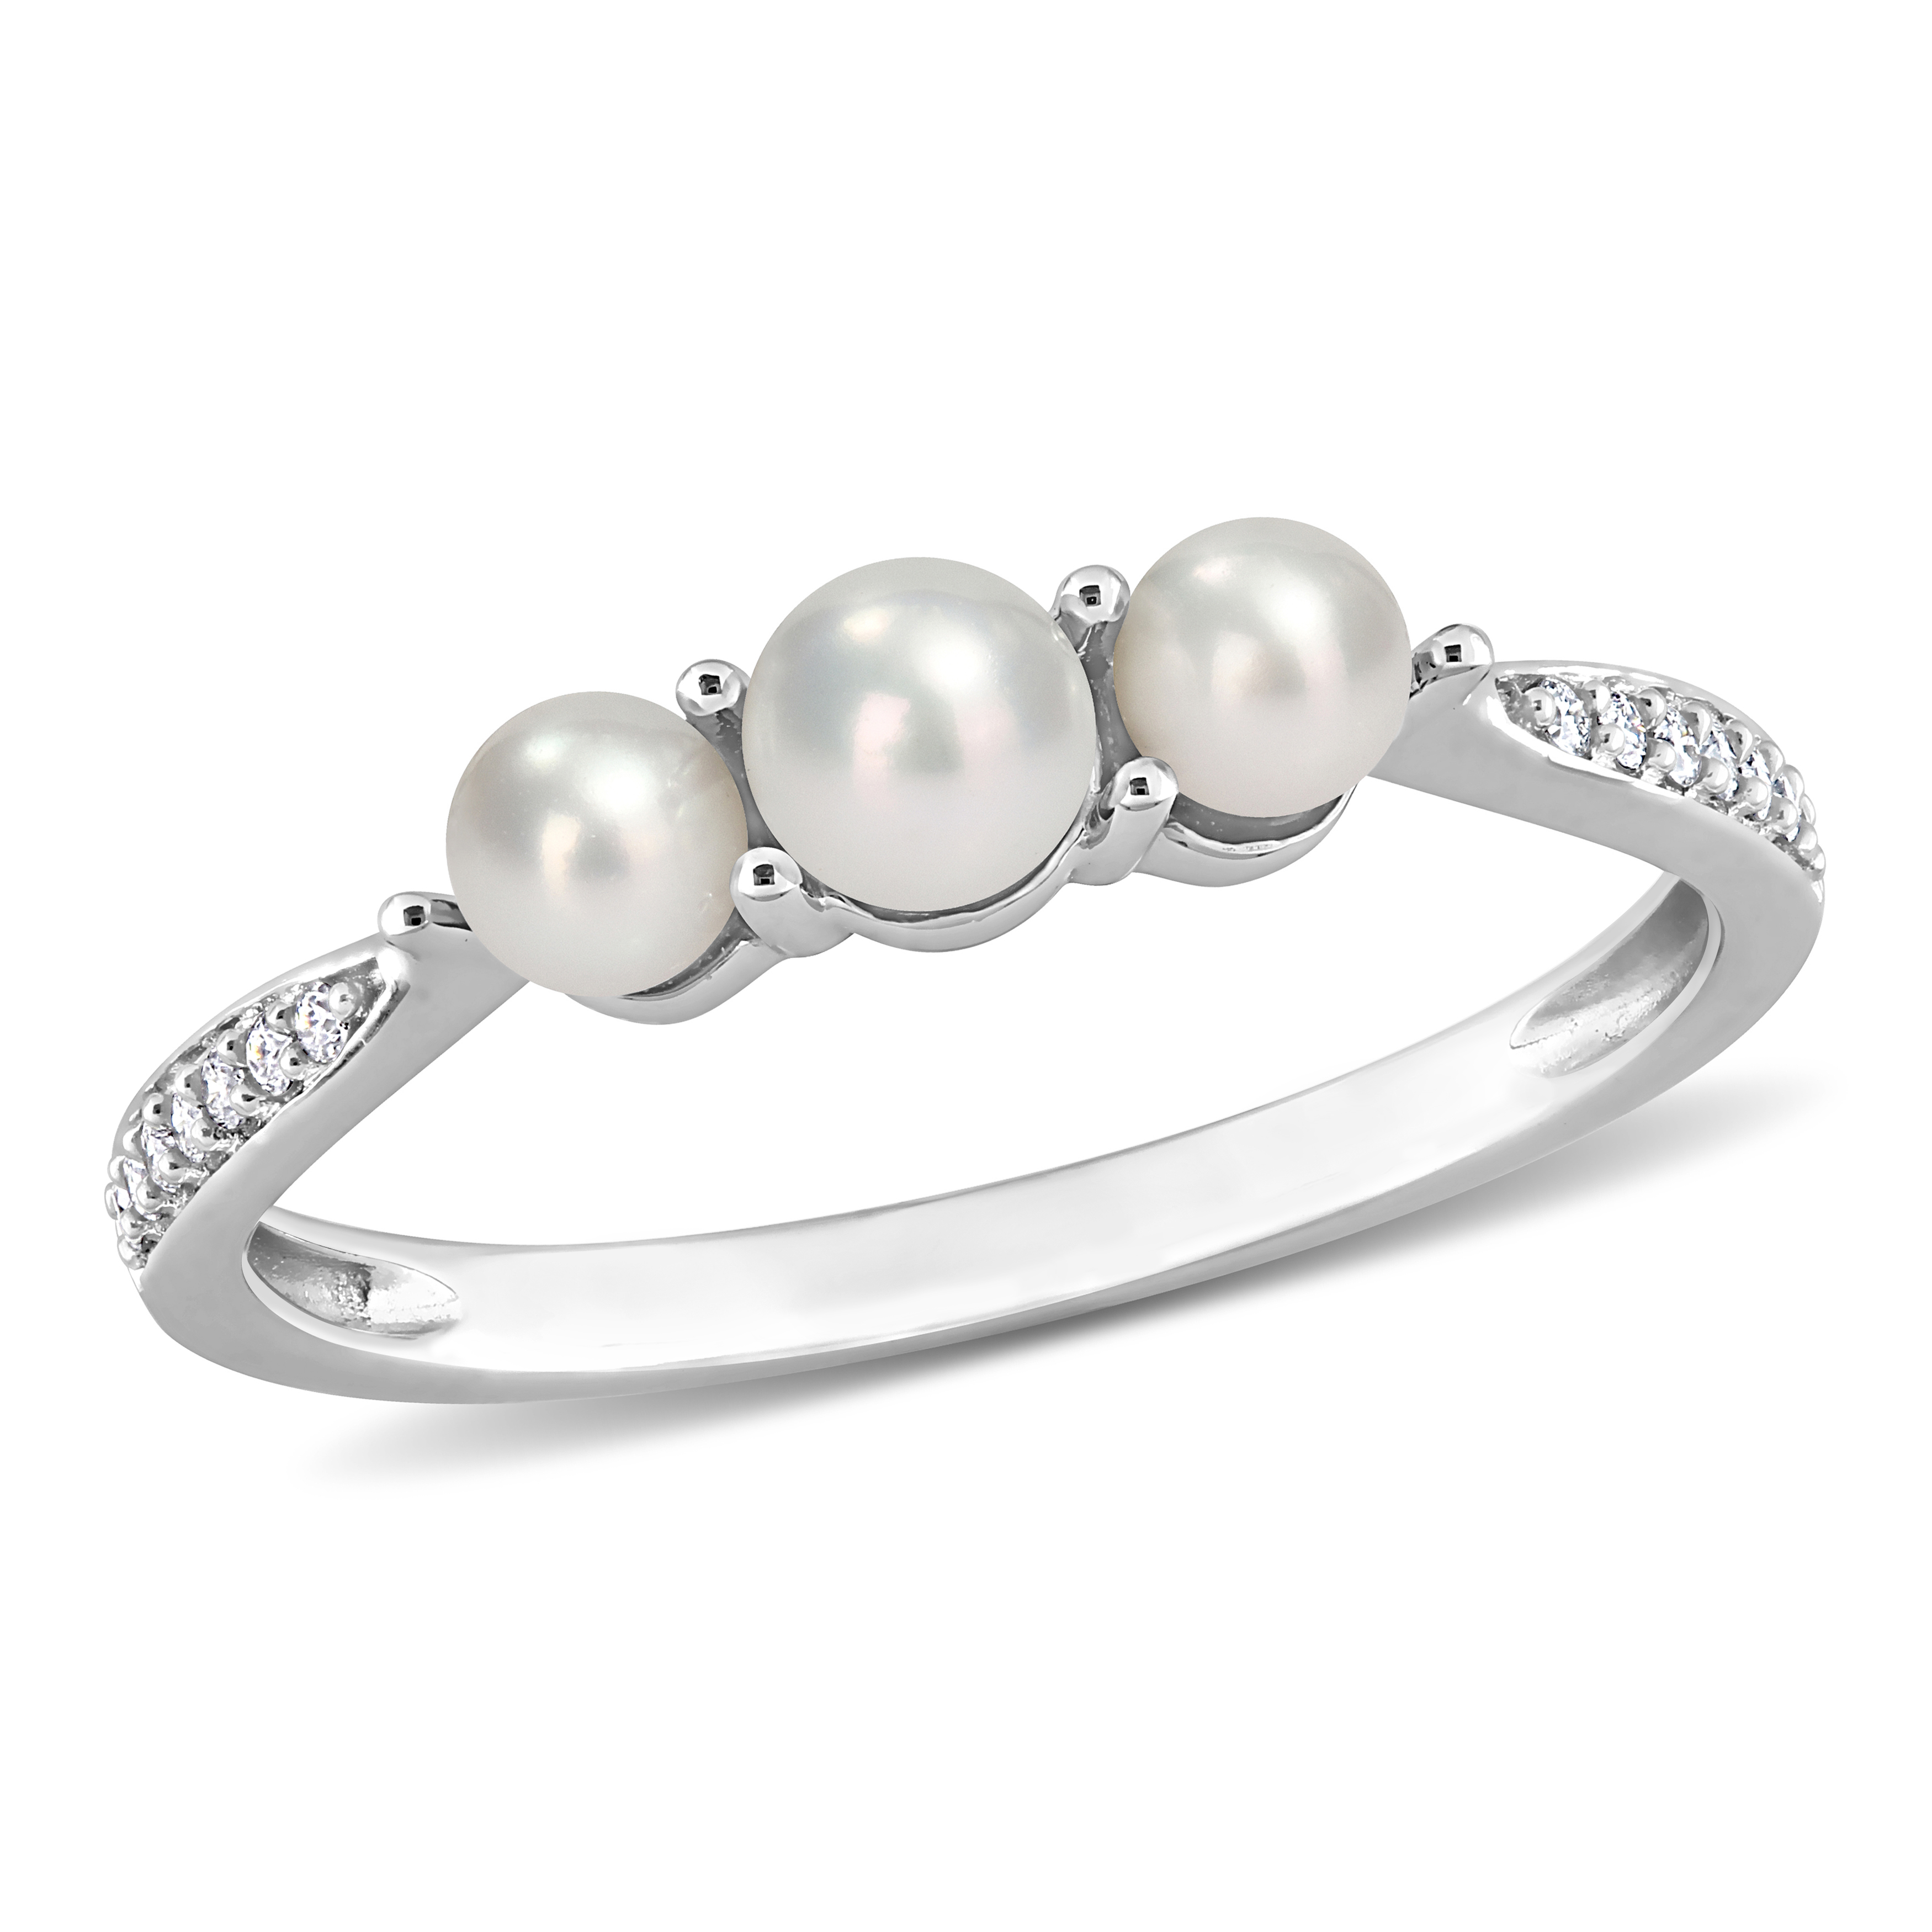 Cultured Freshwater Pearl and Diamond Accent 3-Stone Ring in 14k White Gold